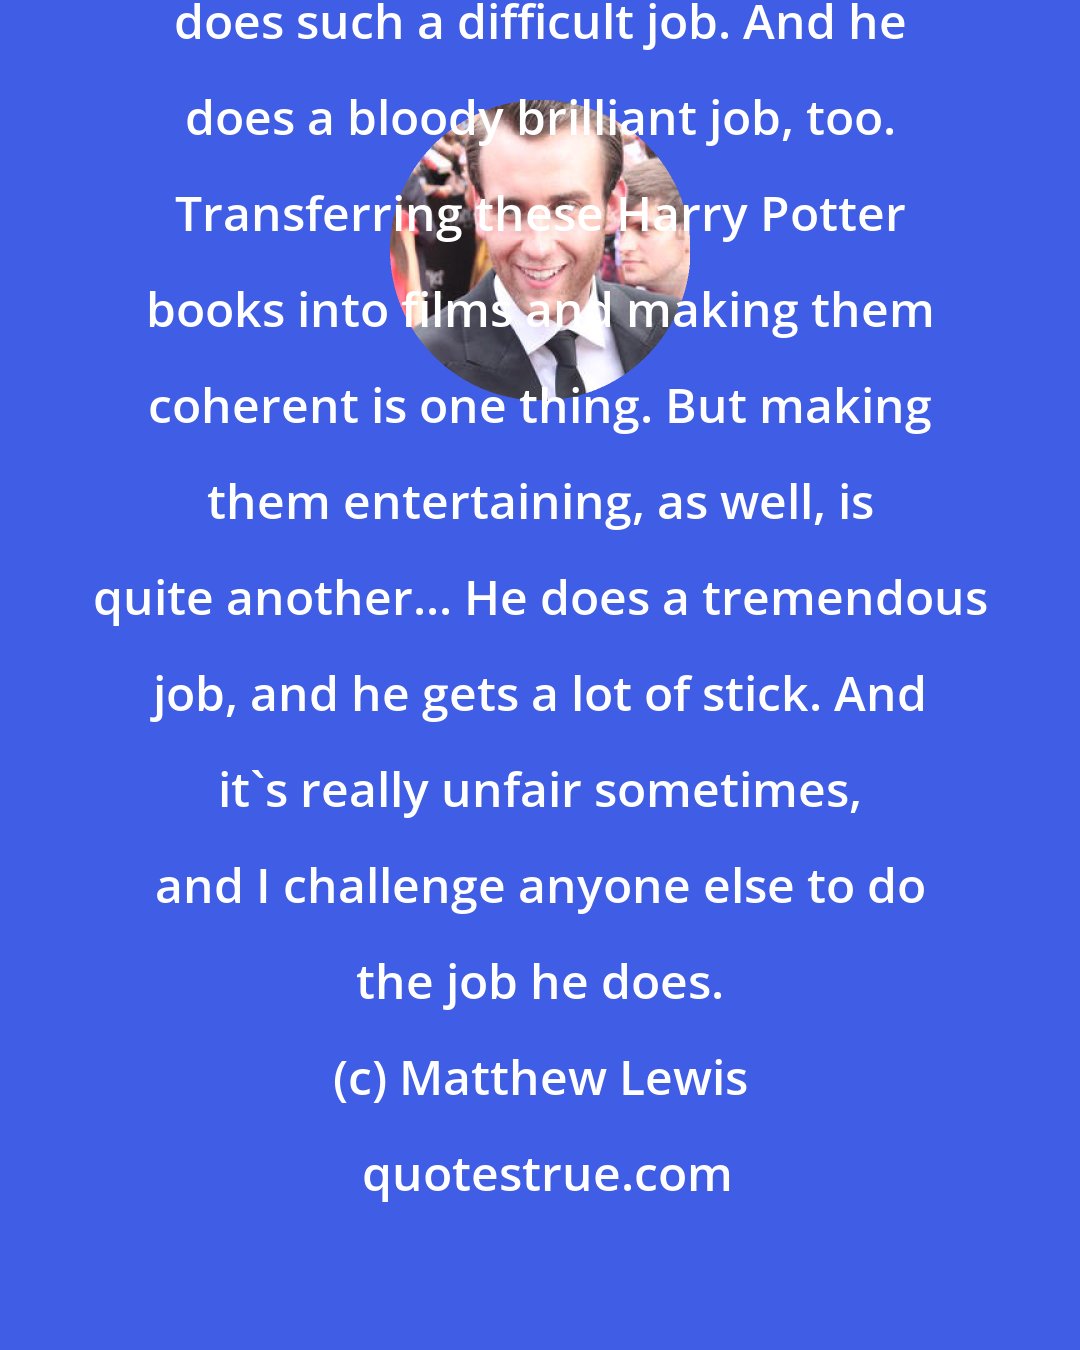 Matthew Lewis: I think screenwriter Steve Kloves does such a difficult job. And he does a bloody brilliant job, too. Transferring these Harry Potter books into films and making them coherent is one thing. But making them entertaining, as well, is quite another... He does a tremendous job, and he gets a lot of stick. And it's really unfair sometimes, and I challenge anyone else to do the job he does.